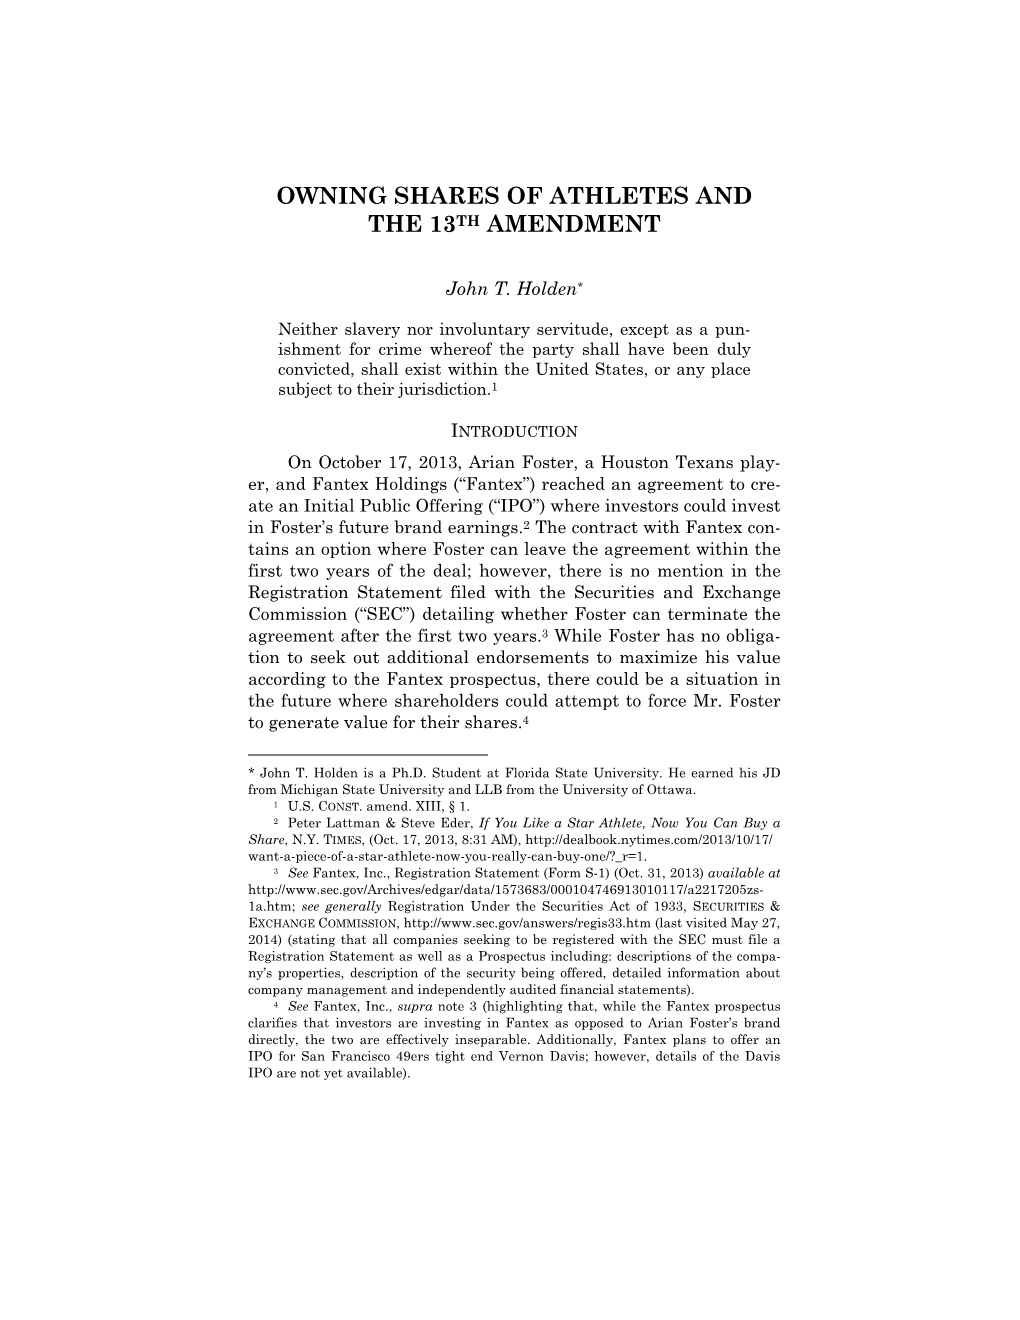 Owning Shares of Athletes and the 13Th Amendment